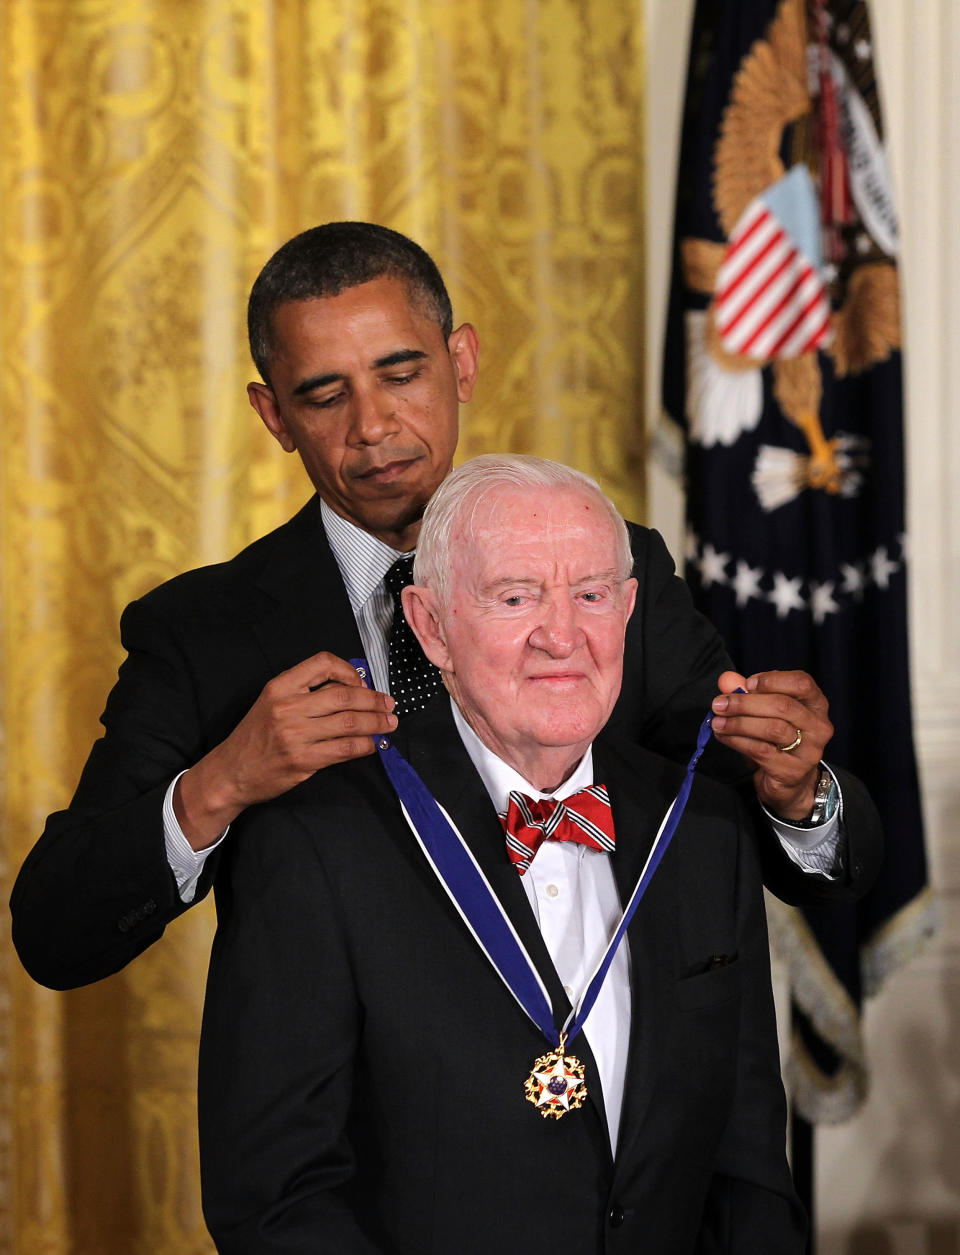 Justice John Paul Stevens is presented with the Presidential Medal of Freedom by President Barack Obama during an East Room event on May 29, 2012. The Medal of Freedom, the nation's highest civilian honor, is&nbsp;given to individuals who have made especially meritorious contributions to the security or national interests of the United States, to world peace, or to cultural or other significant public or private endeavors.